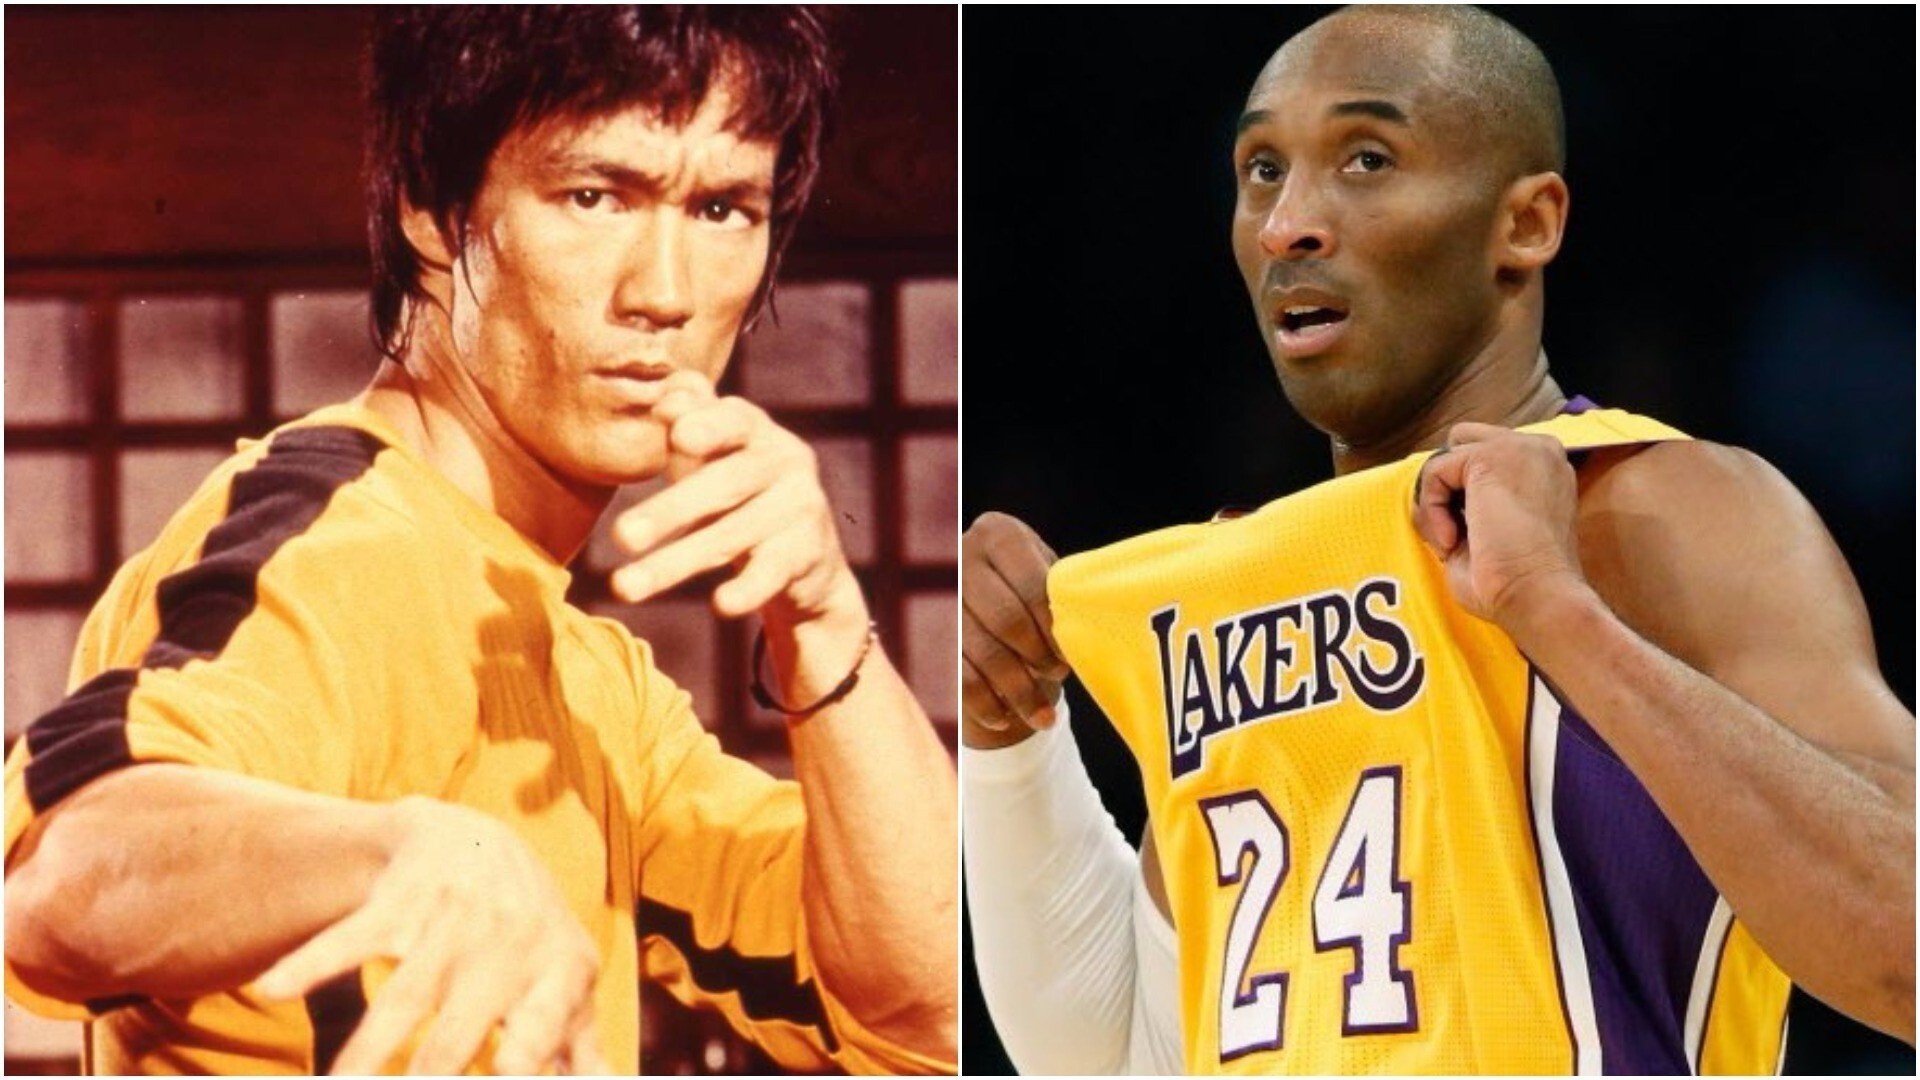 ESPN 30 for 30 'Be Water': how Bruce Lee inspired the NBA, from Kareem  Abdul-Jabbar to Kobe Bryant | South China Morning Post